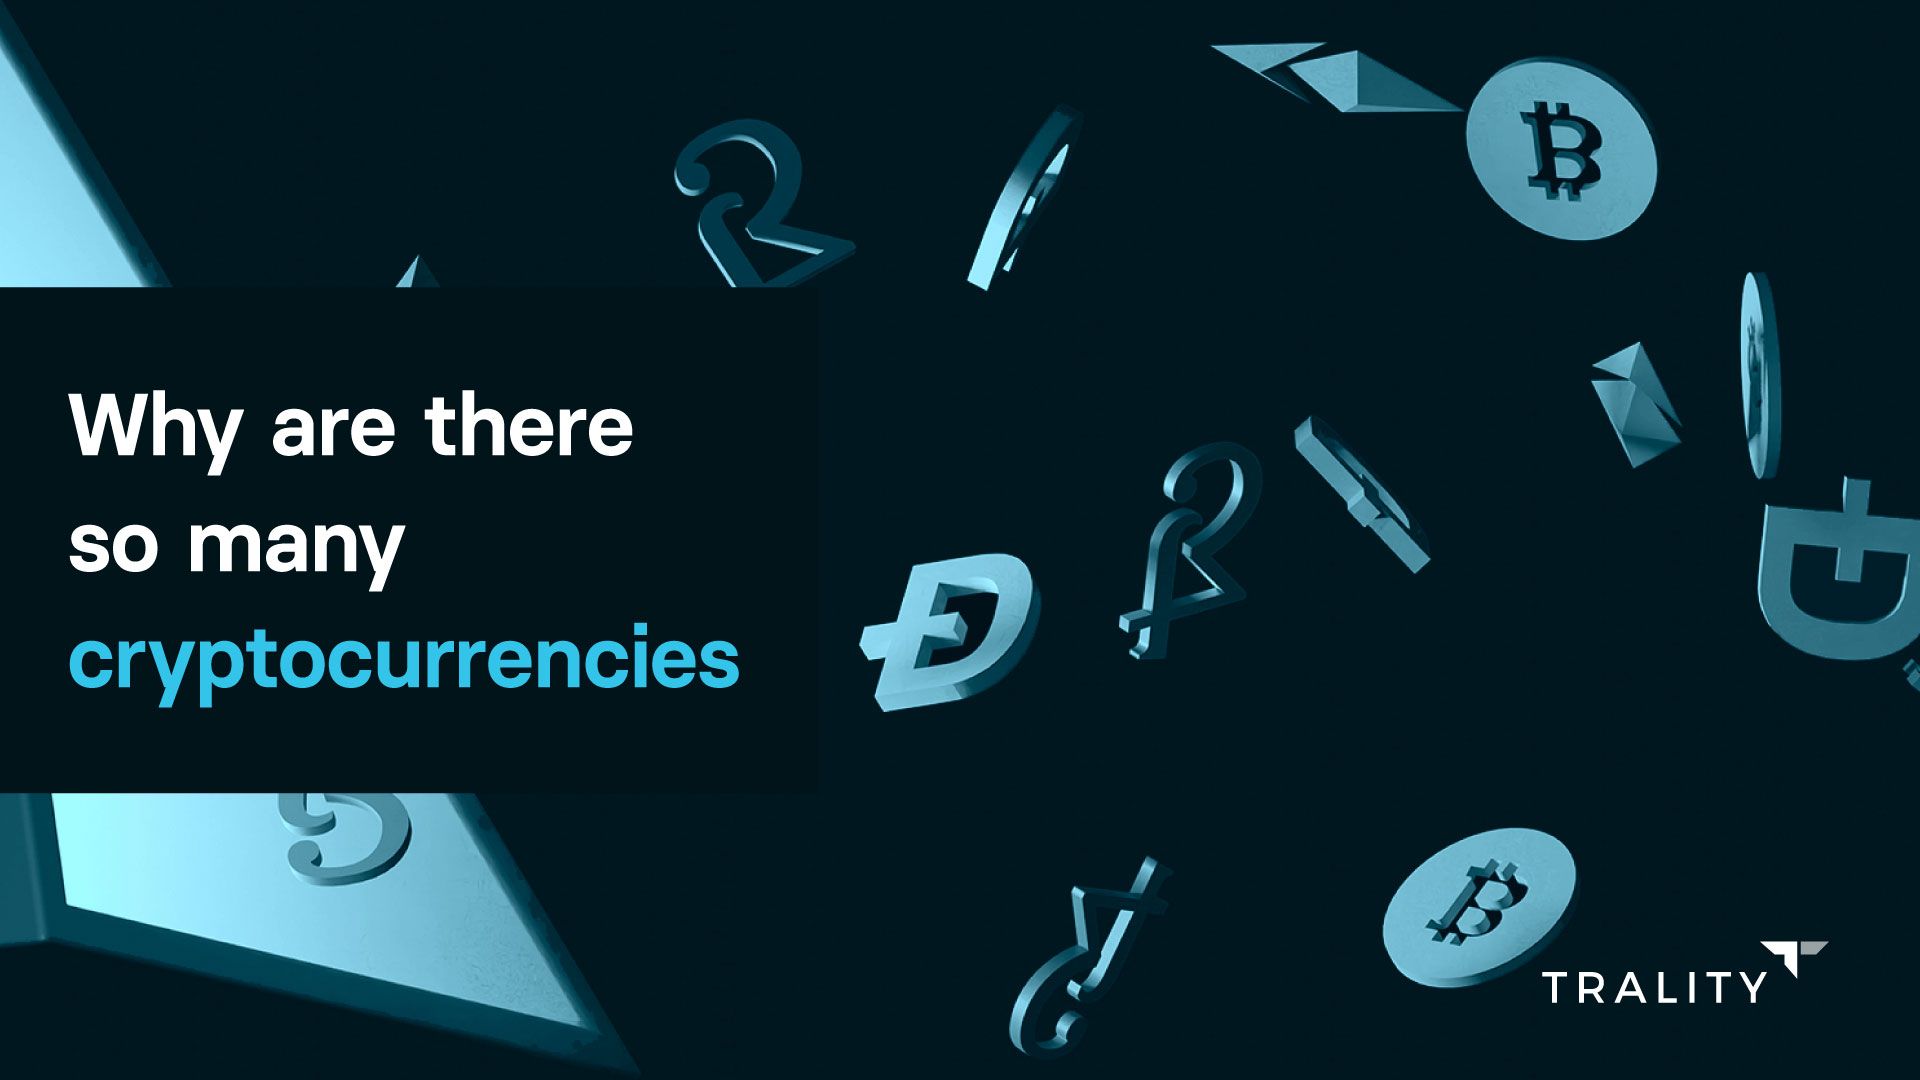 How are there so many cryptocurrencies ethereum ???????????